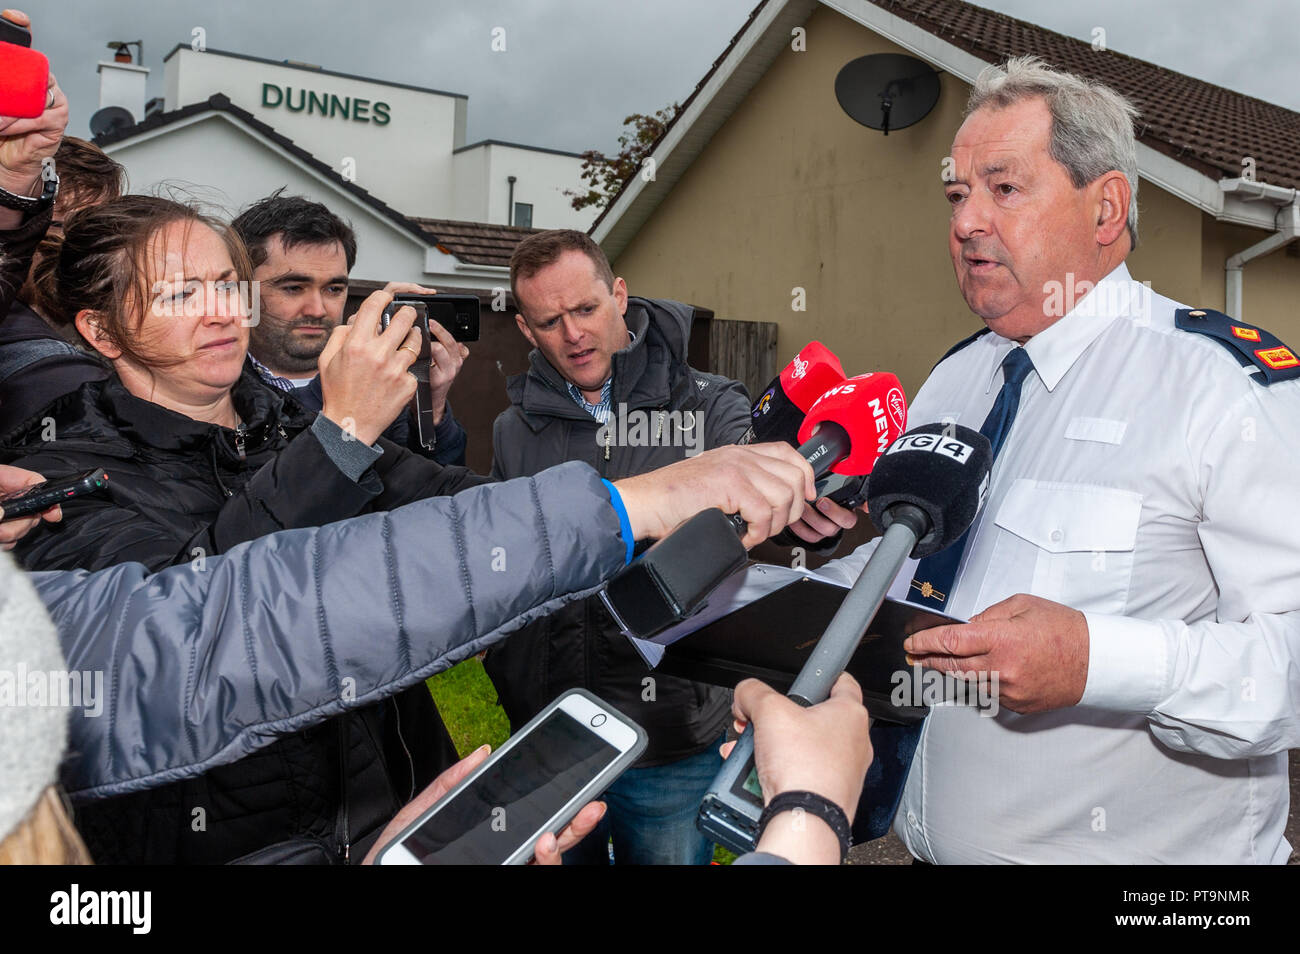 Macroom, West Cork, Ireland. 8th Oct, 2018. Garda Superintendent Michael Fitzpatrick from Macroom Garda Station give a press conference at the scene of a fatal stabbing in Dan Corkery Place, Macroom. The State Pathologist is due on the scene at 4pm today. Credit: AG News/Alamy Live News. Stock Photo